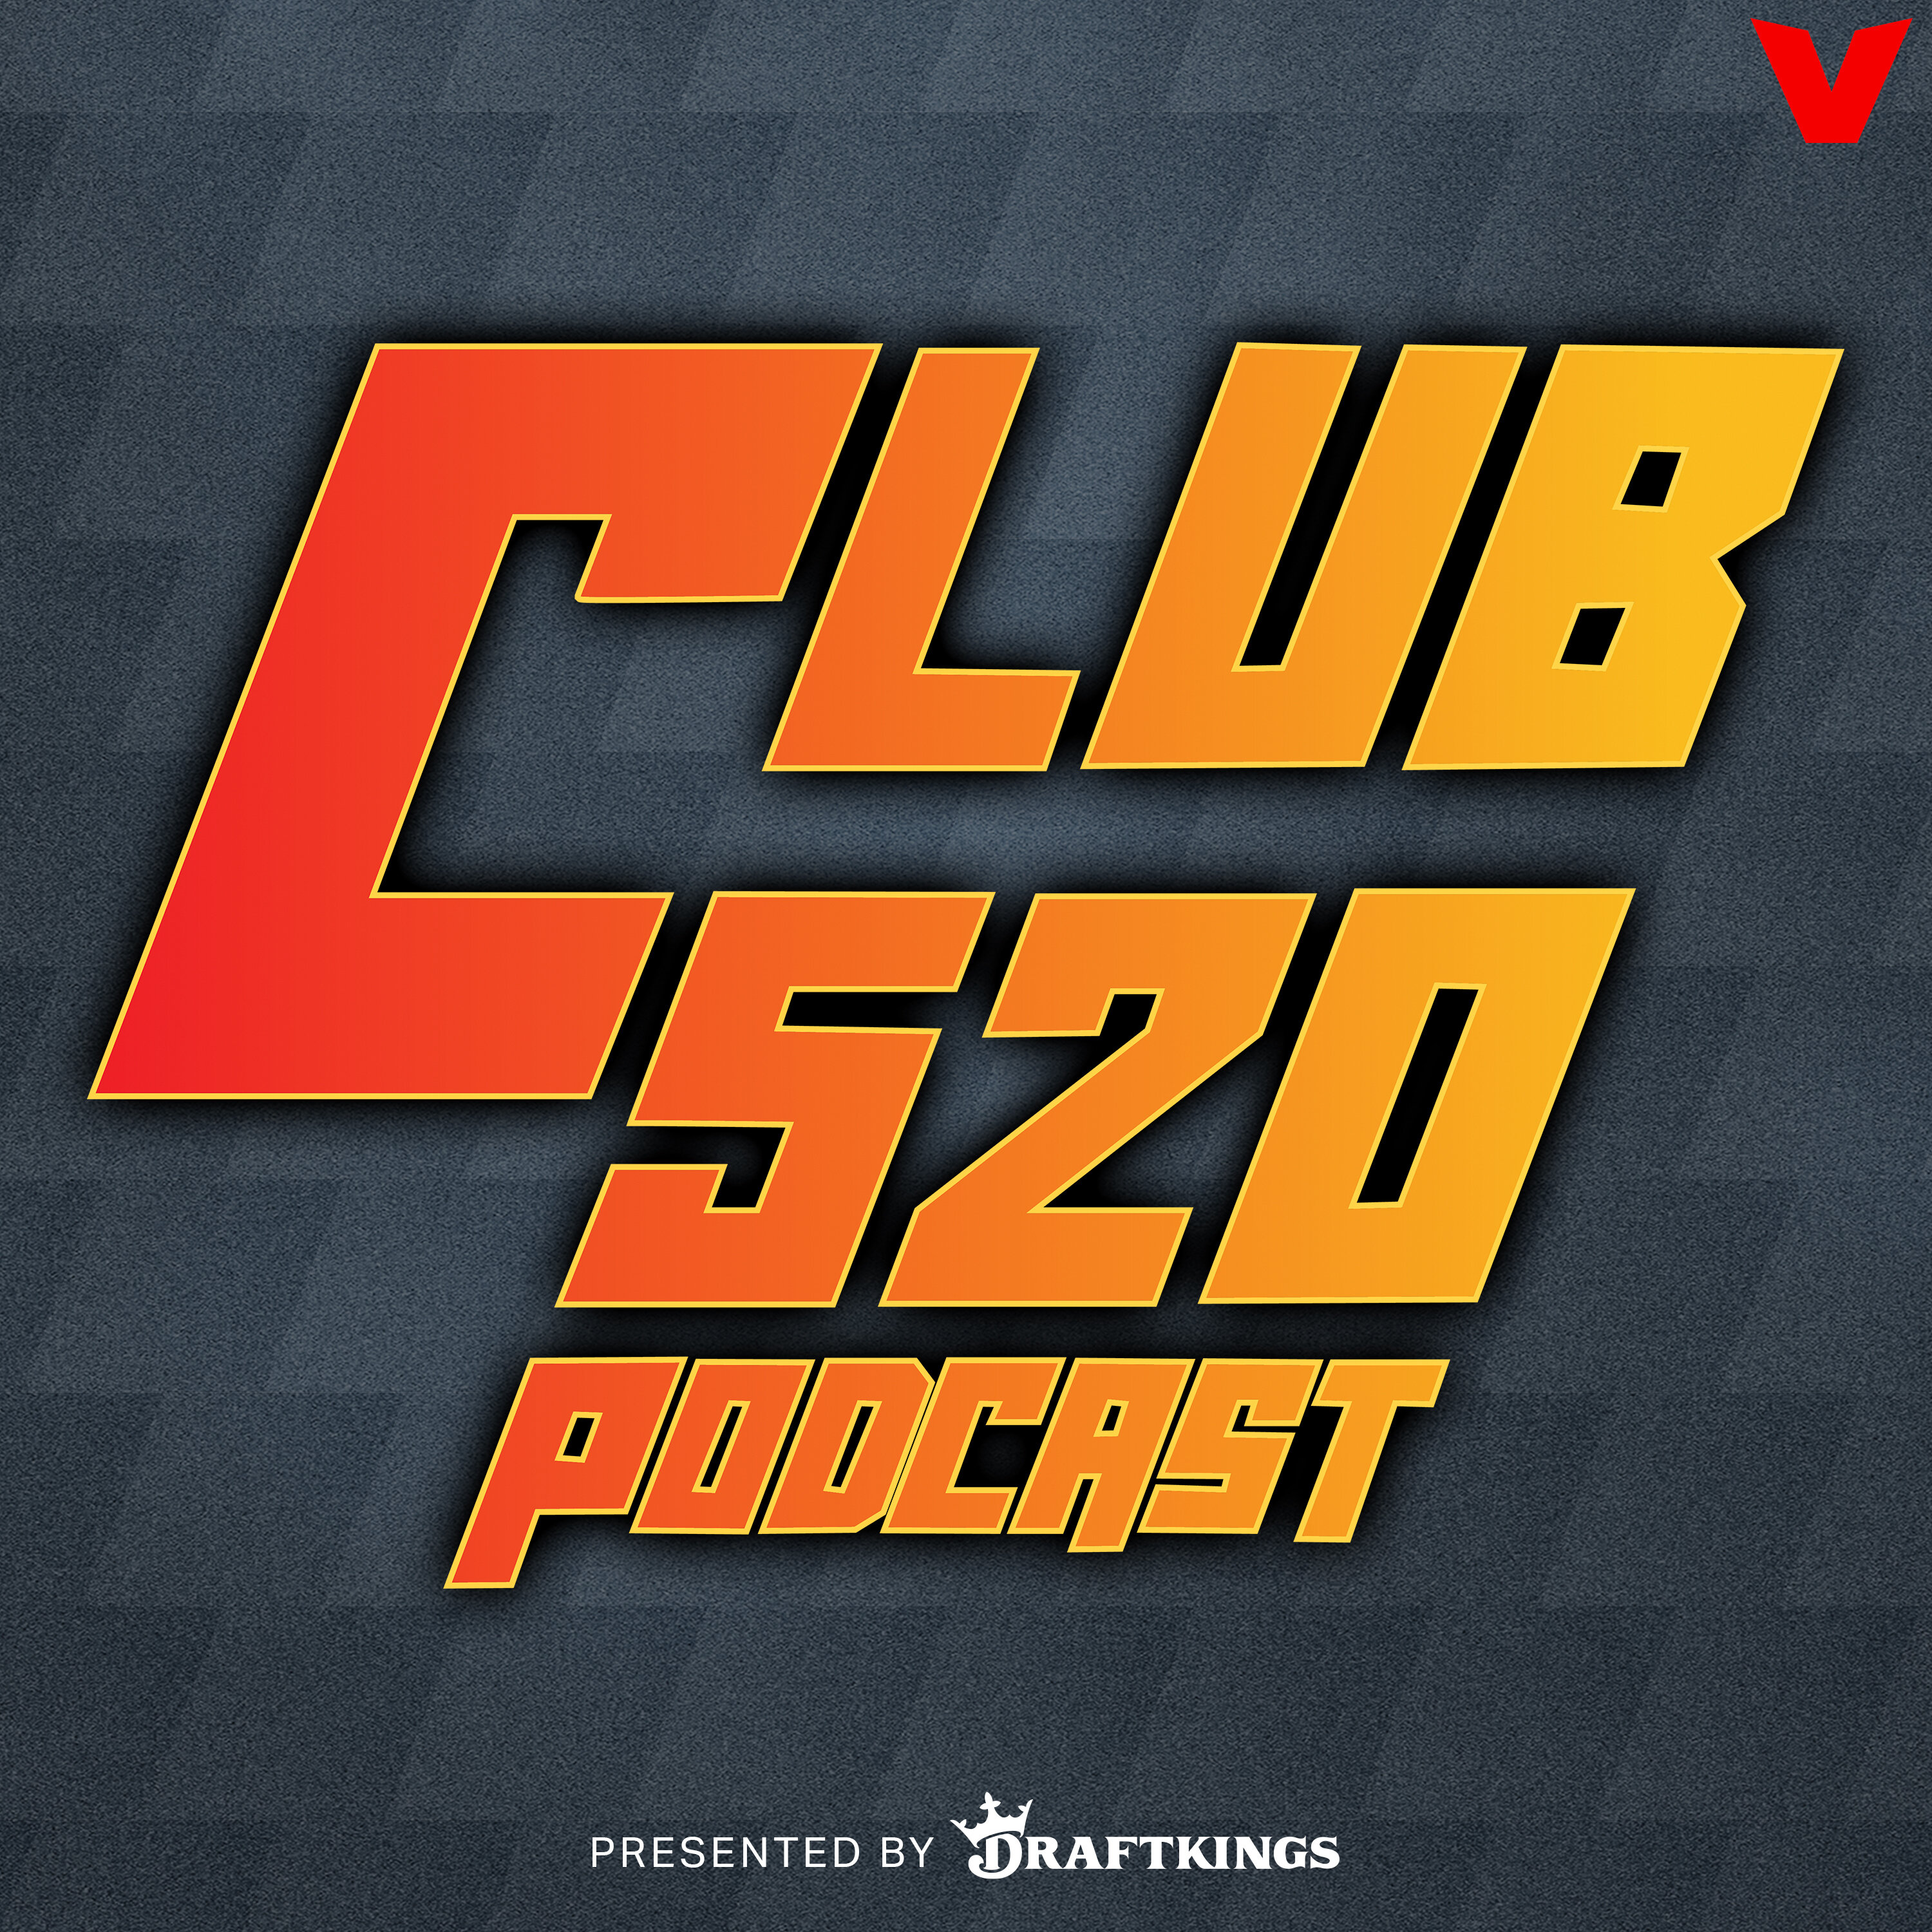 Club 520 - Michael Blackson got PULLED OVER w/ Kevin Hart, meeting Ice Cube, Embiid & 76ers